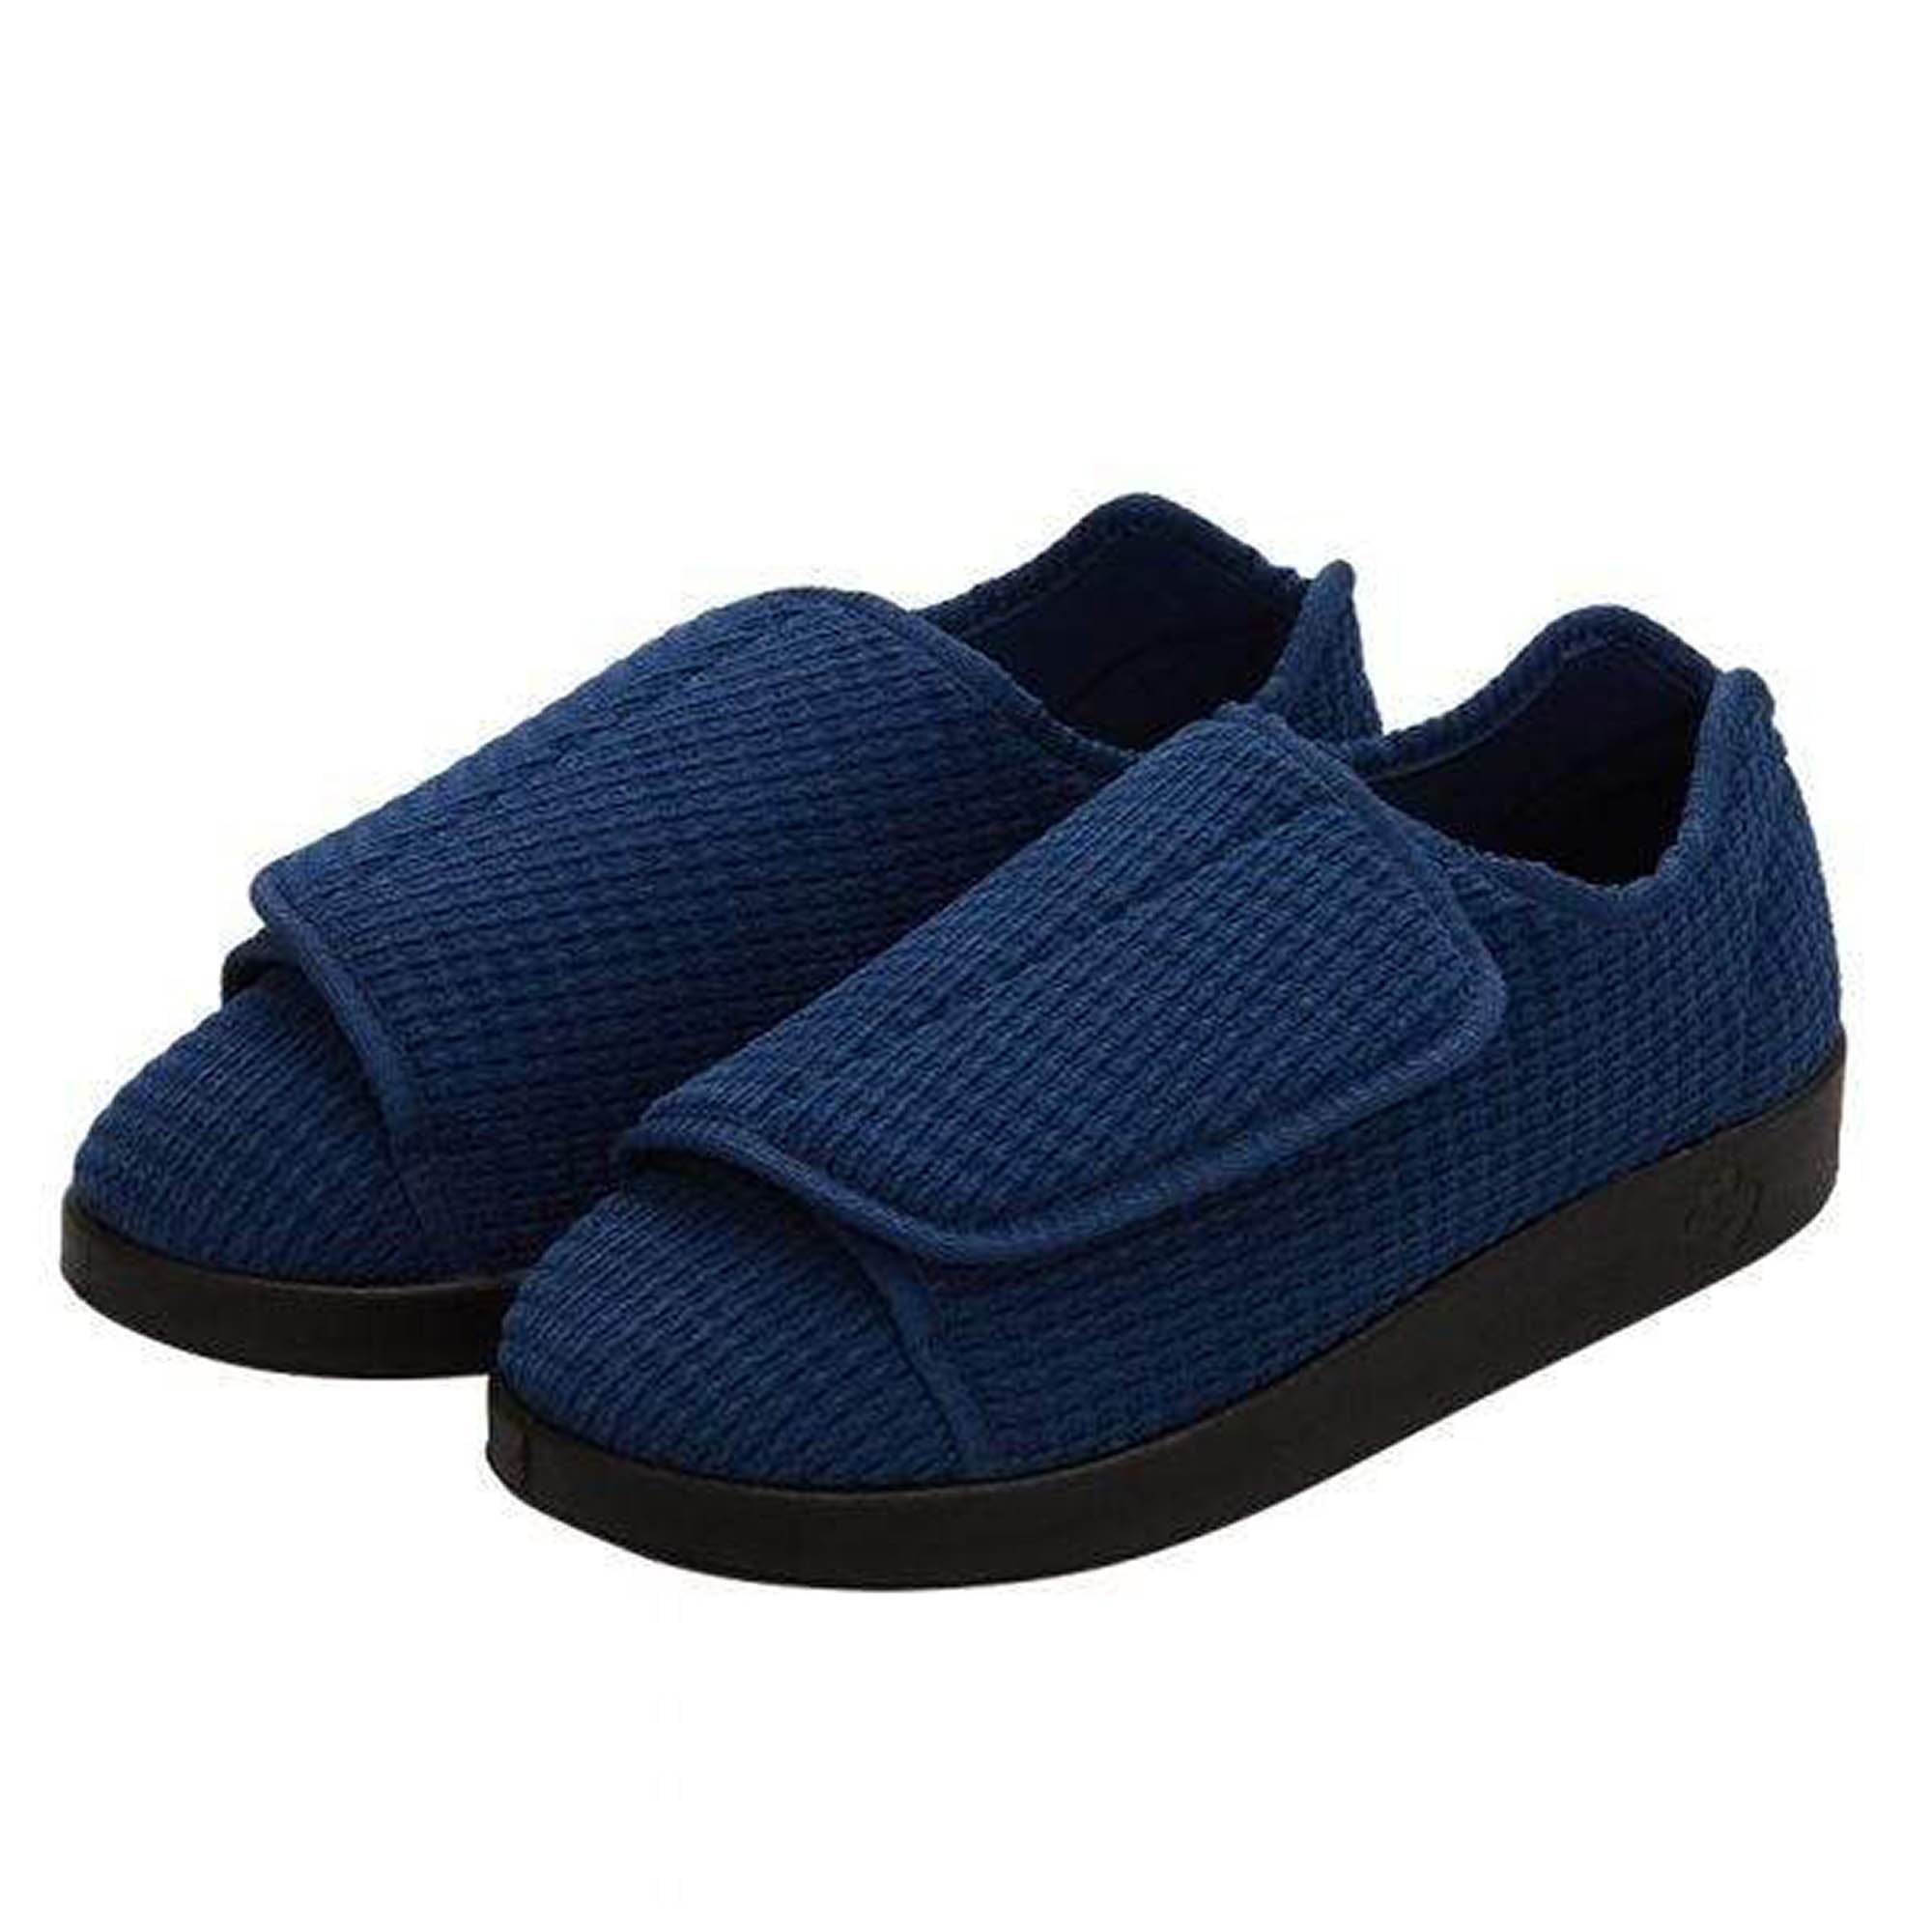 Silverts Men's Extra Extra Wide Slip-Resistant Slippers - Navy - 12